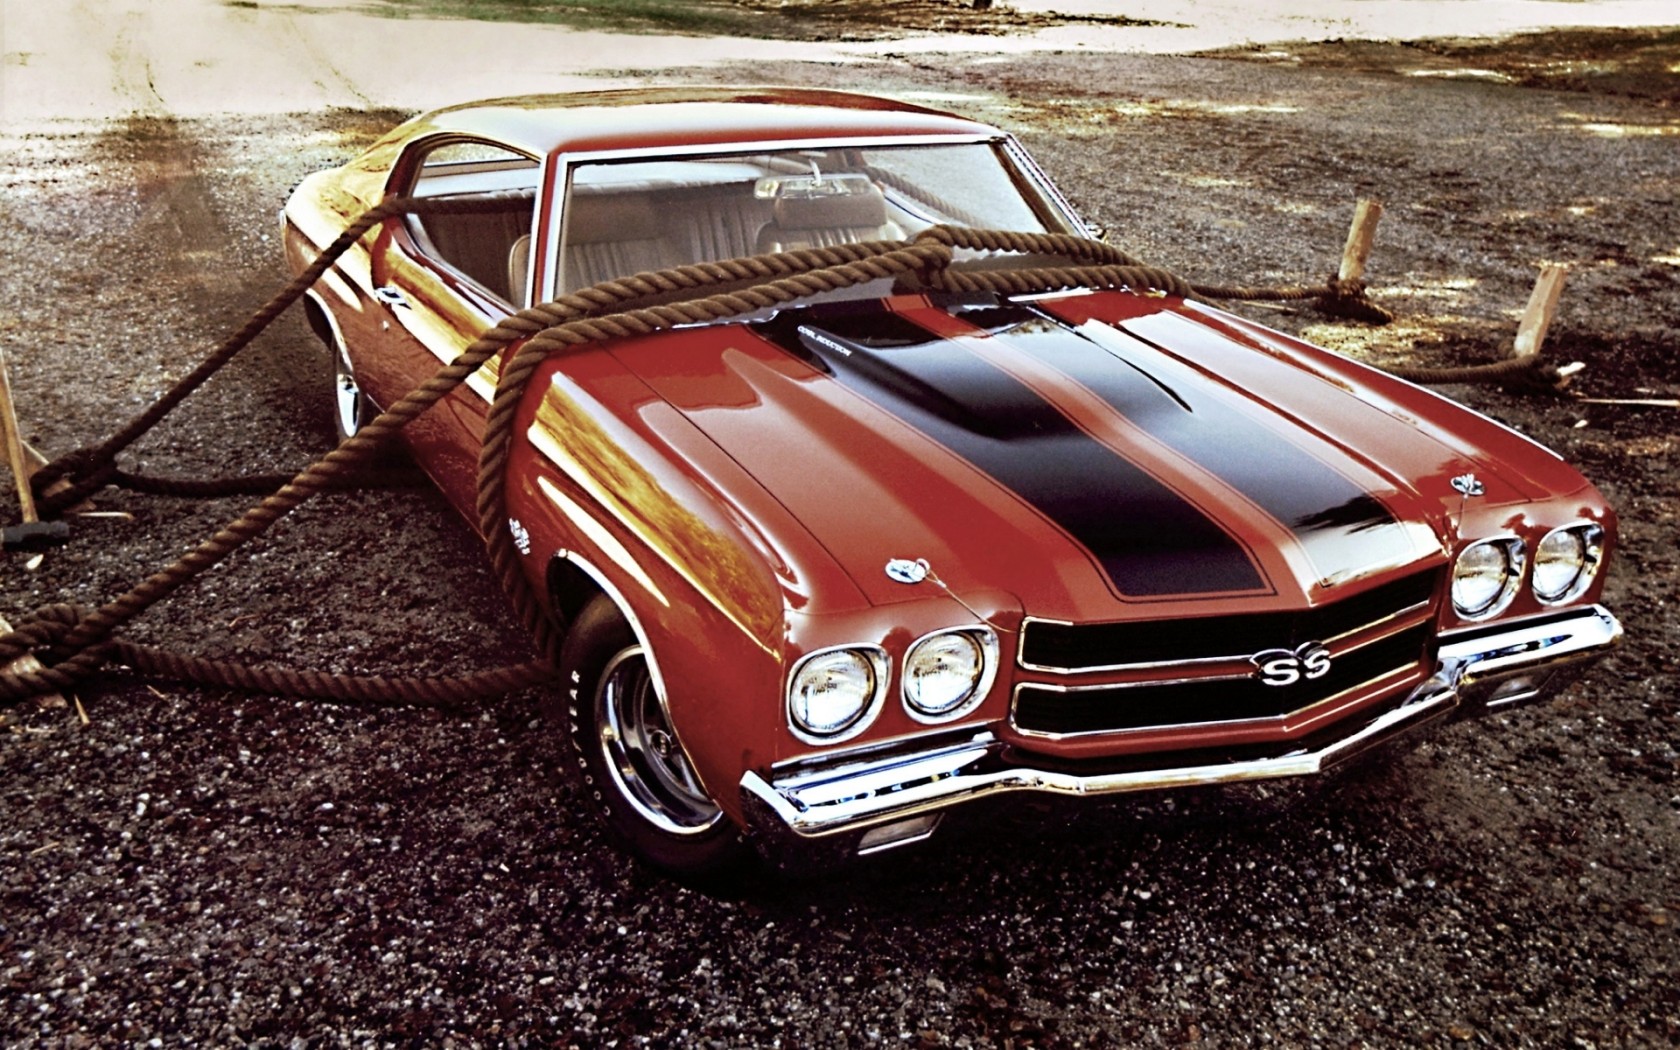 Car Chevrolet Chevrolet Chevelle Chevrolet Chevelle Ss Muscle Car Red Car Vehicle 1680x1050